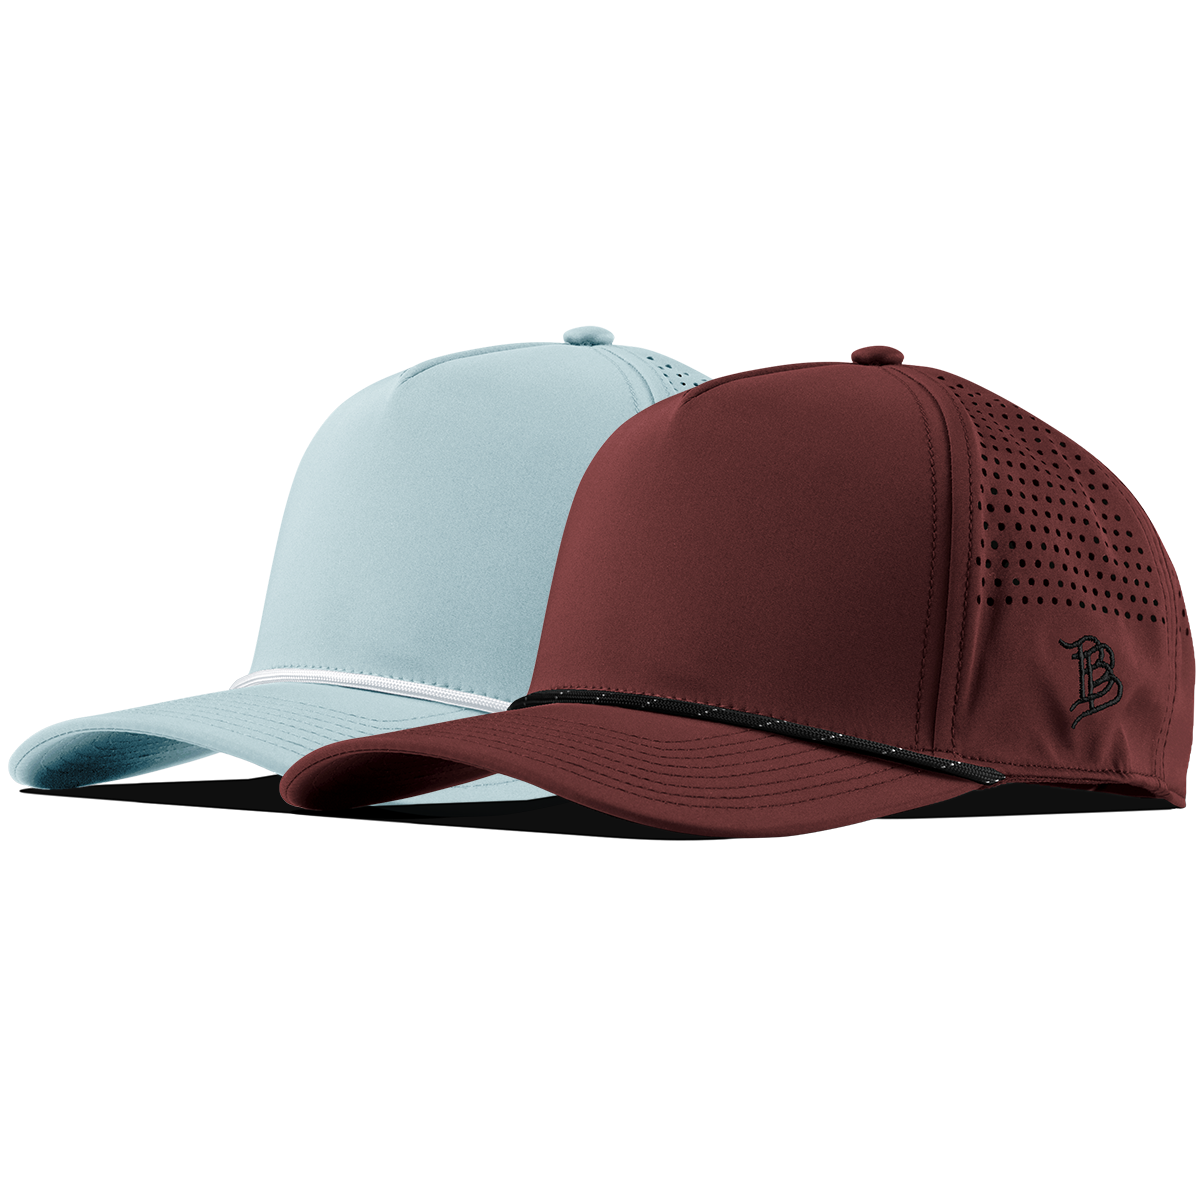 Bare Curved 5 Panel Rope 2-Pack Maroon/Black + Sky Blue/White